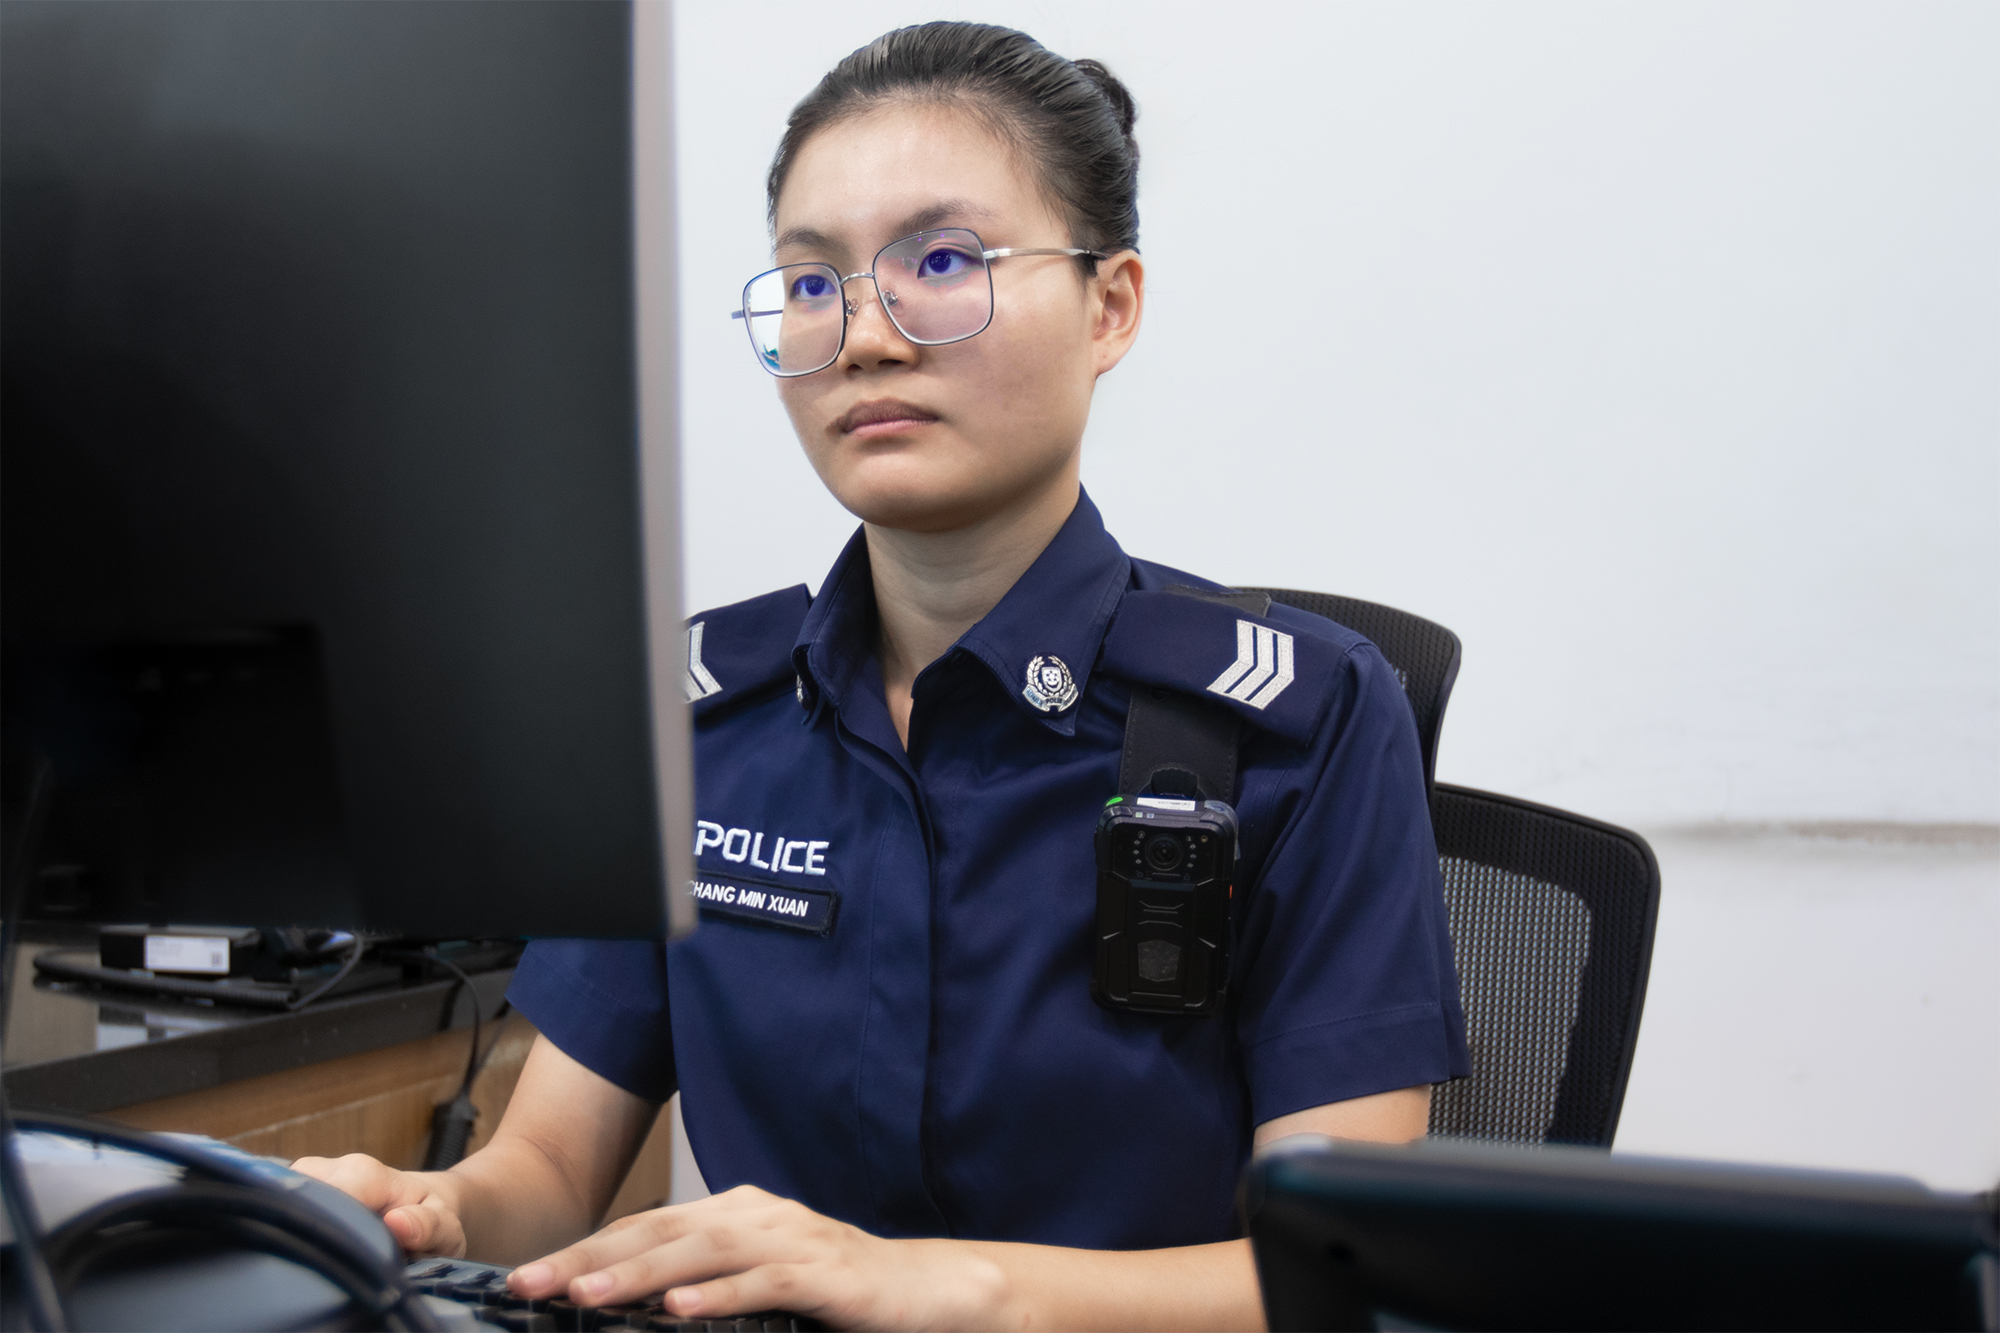 Sgt (V) Chang finds joy in volunteering as a VSC officer, which has allowed her to learn new skills and serve others more directly. PHOTO: Alethea Lee